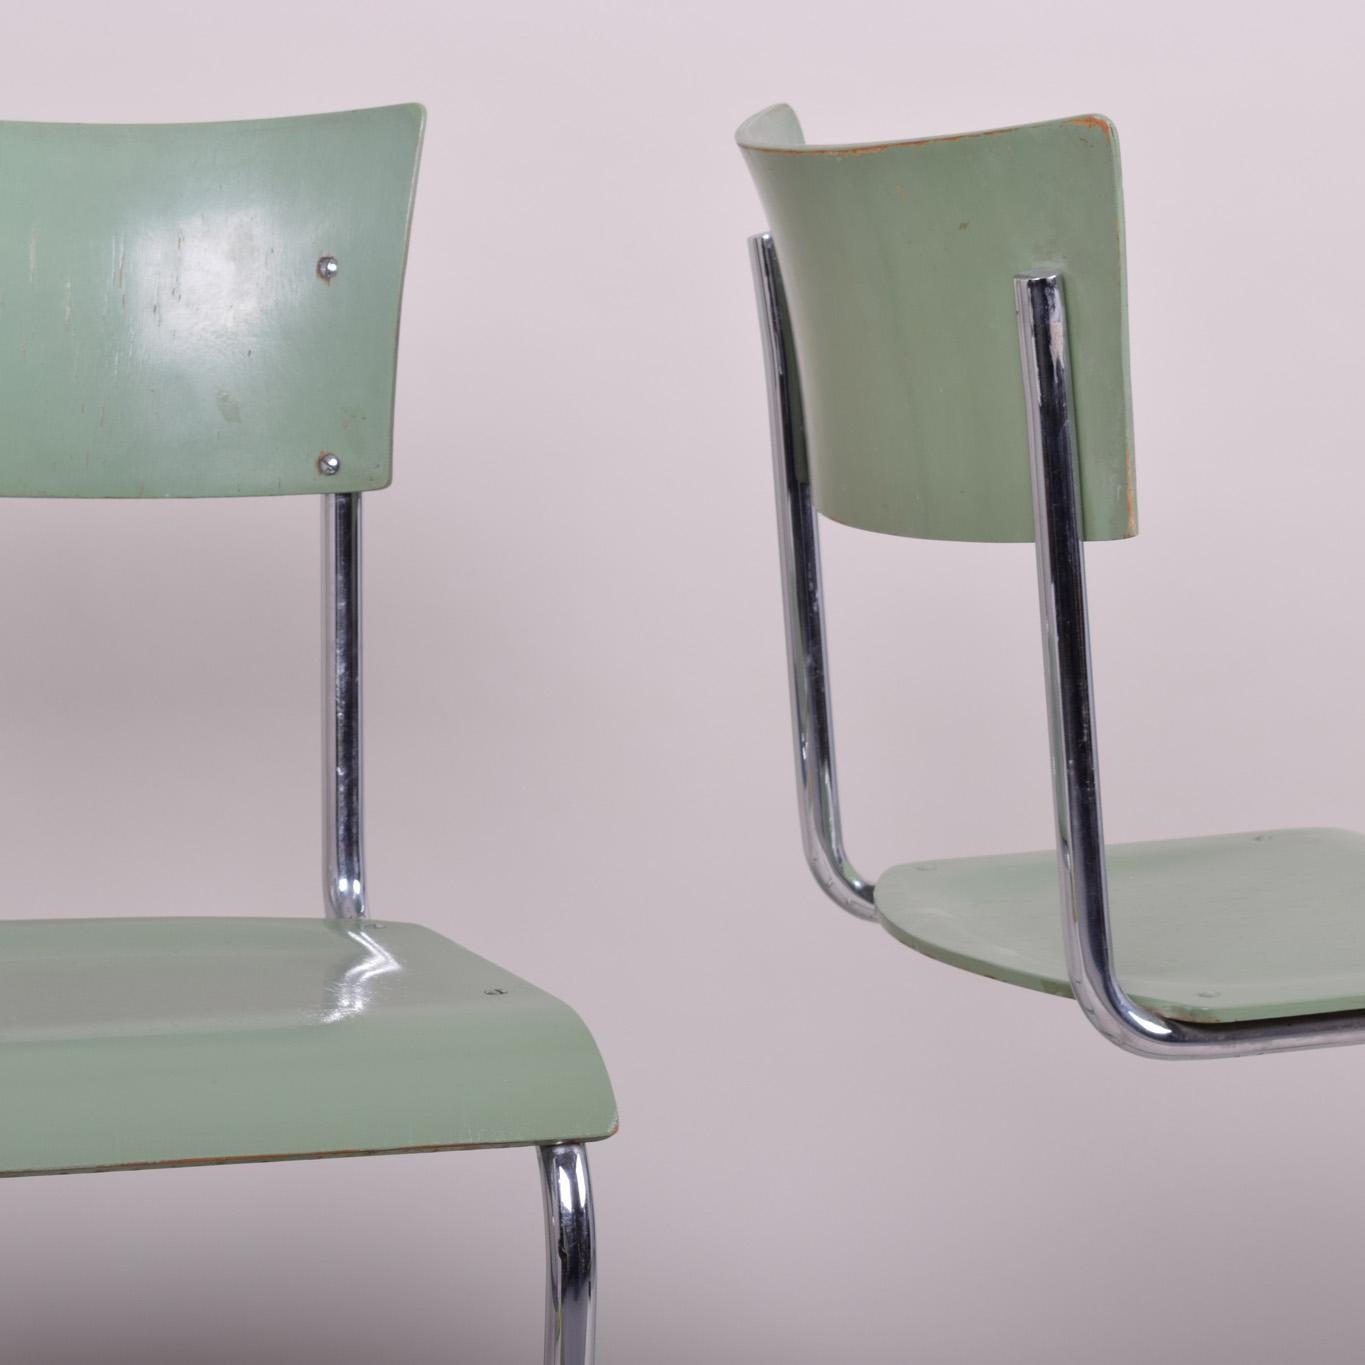 Pair of Green Bauhaus Chairs Made in 1930s Czechia, Made by Robert Slezák In Good Condition For Sale In Horomerice, CZ